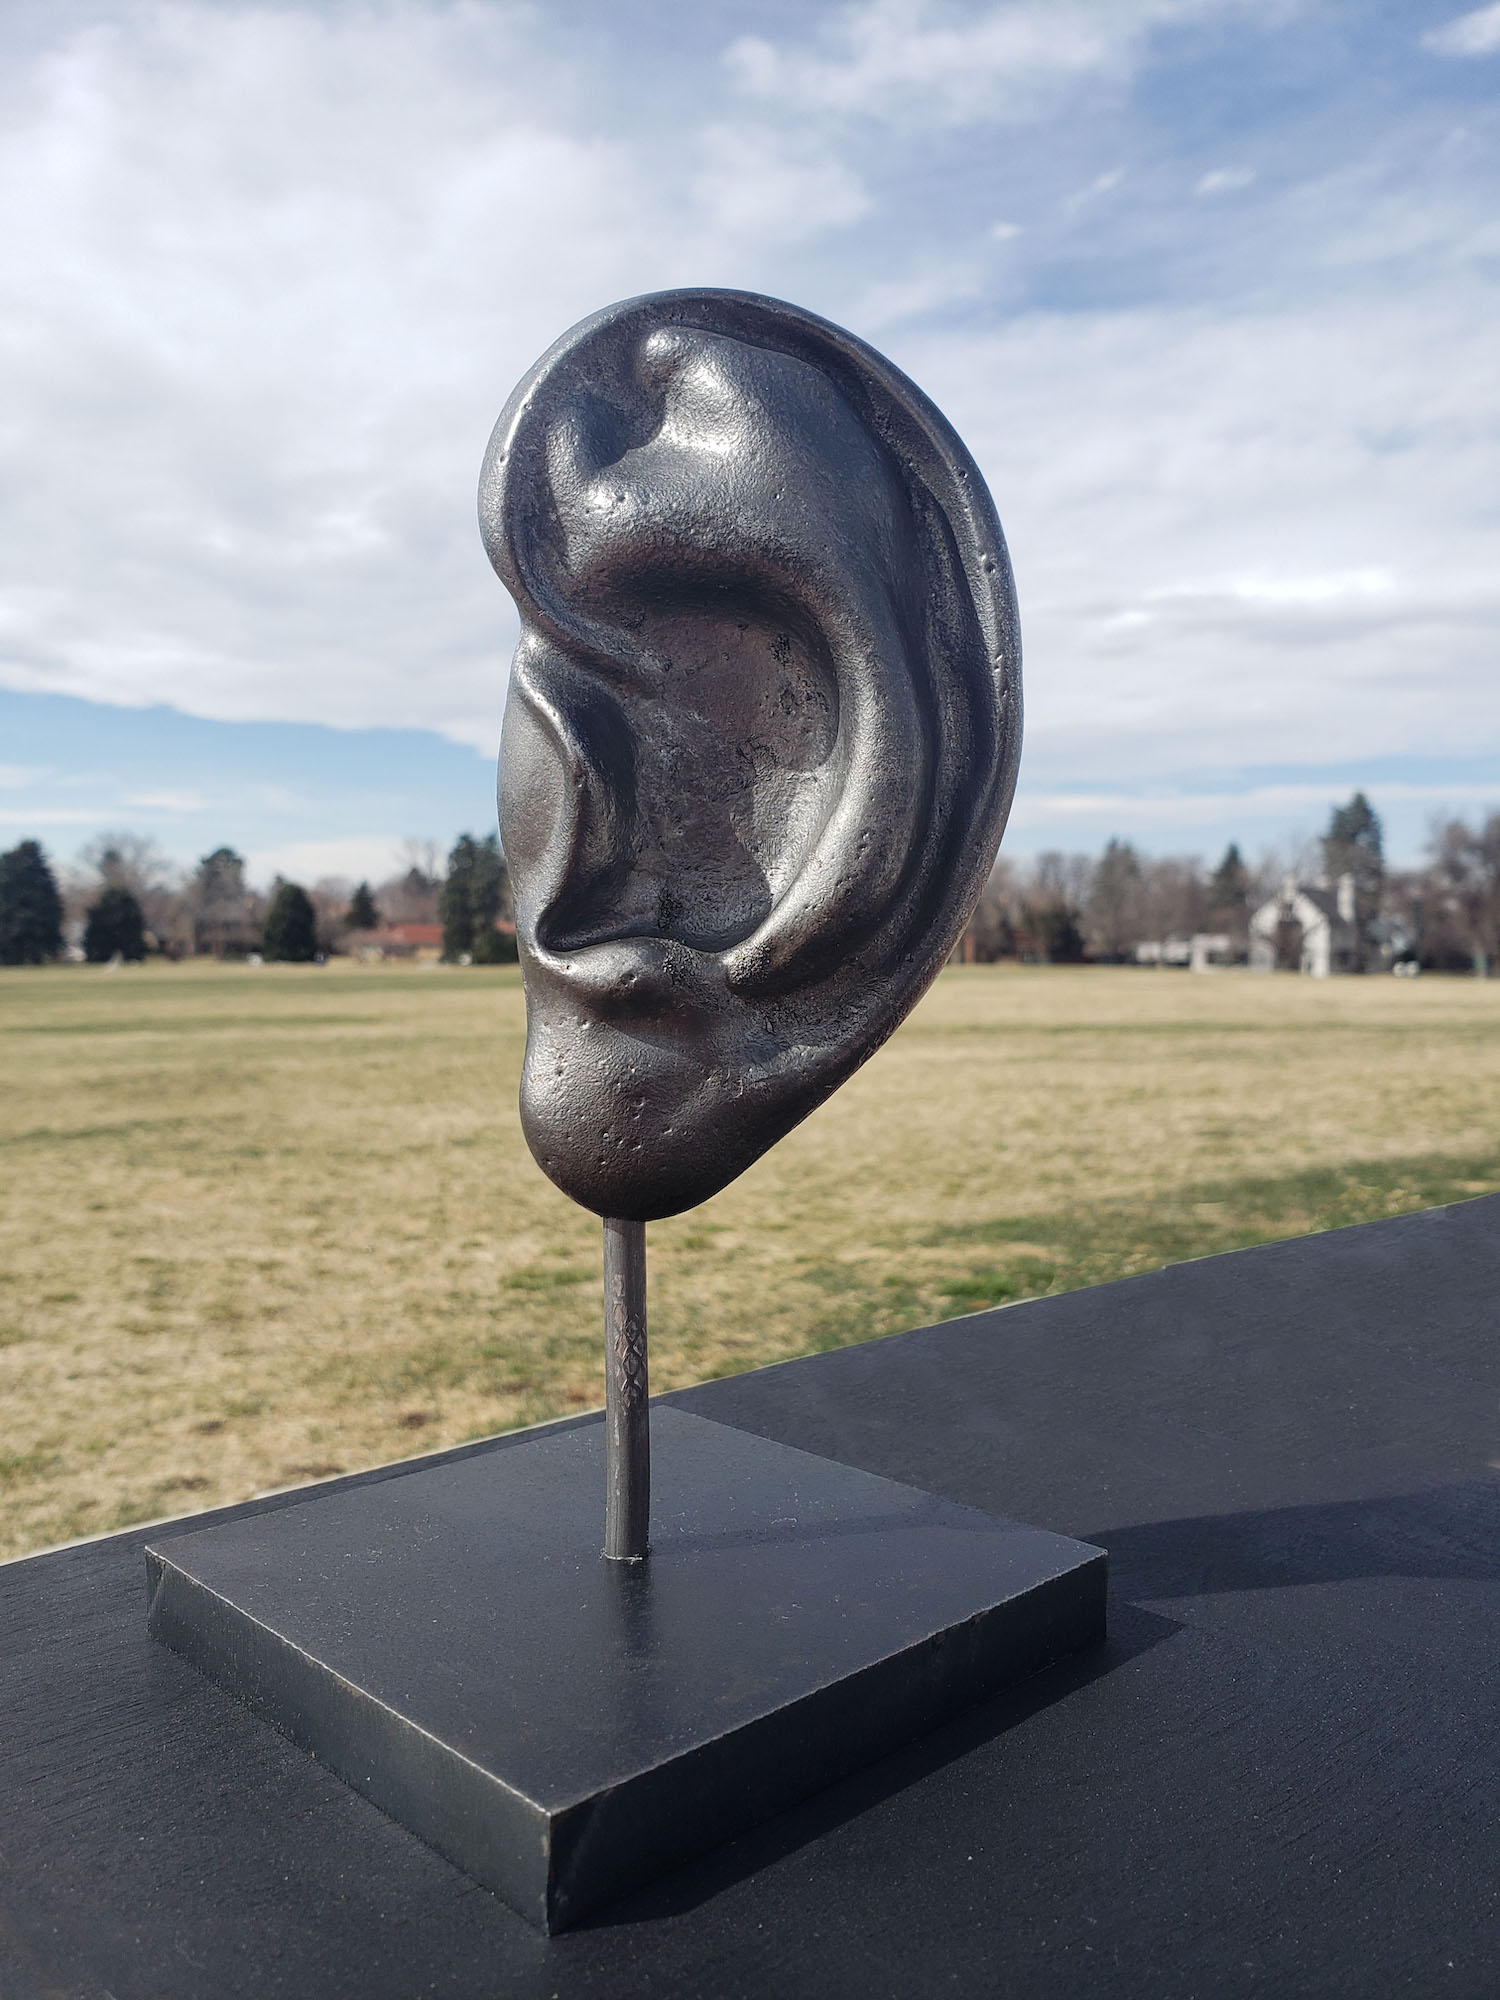 Art You Listening, Laura Phelps Rogers, dimesions variable, shown as cast iron available in aluminum and bronze, 2022 - 20220327_150643